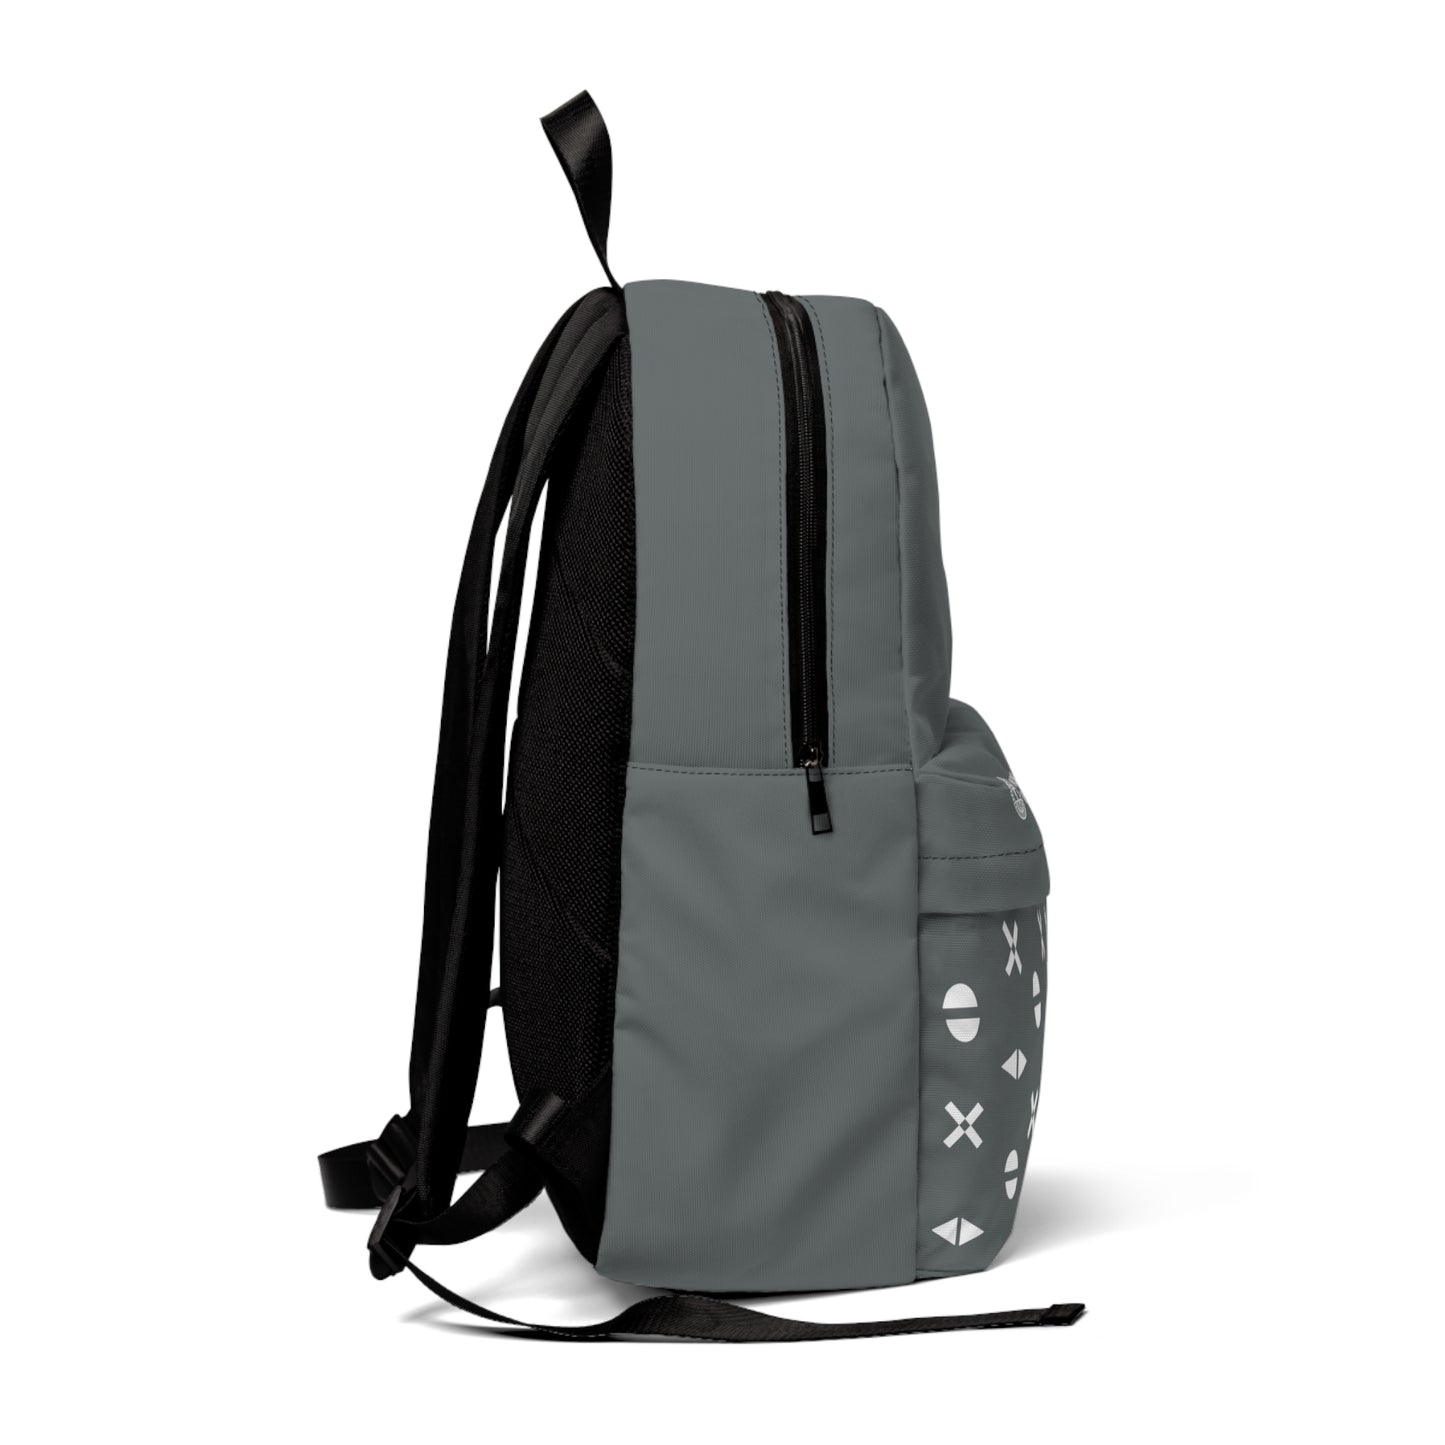 Love Changes Everything Backpack